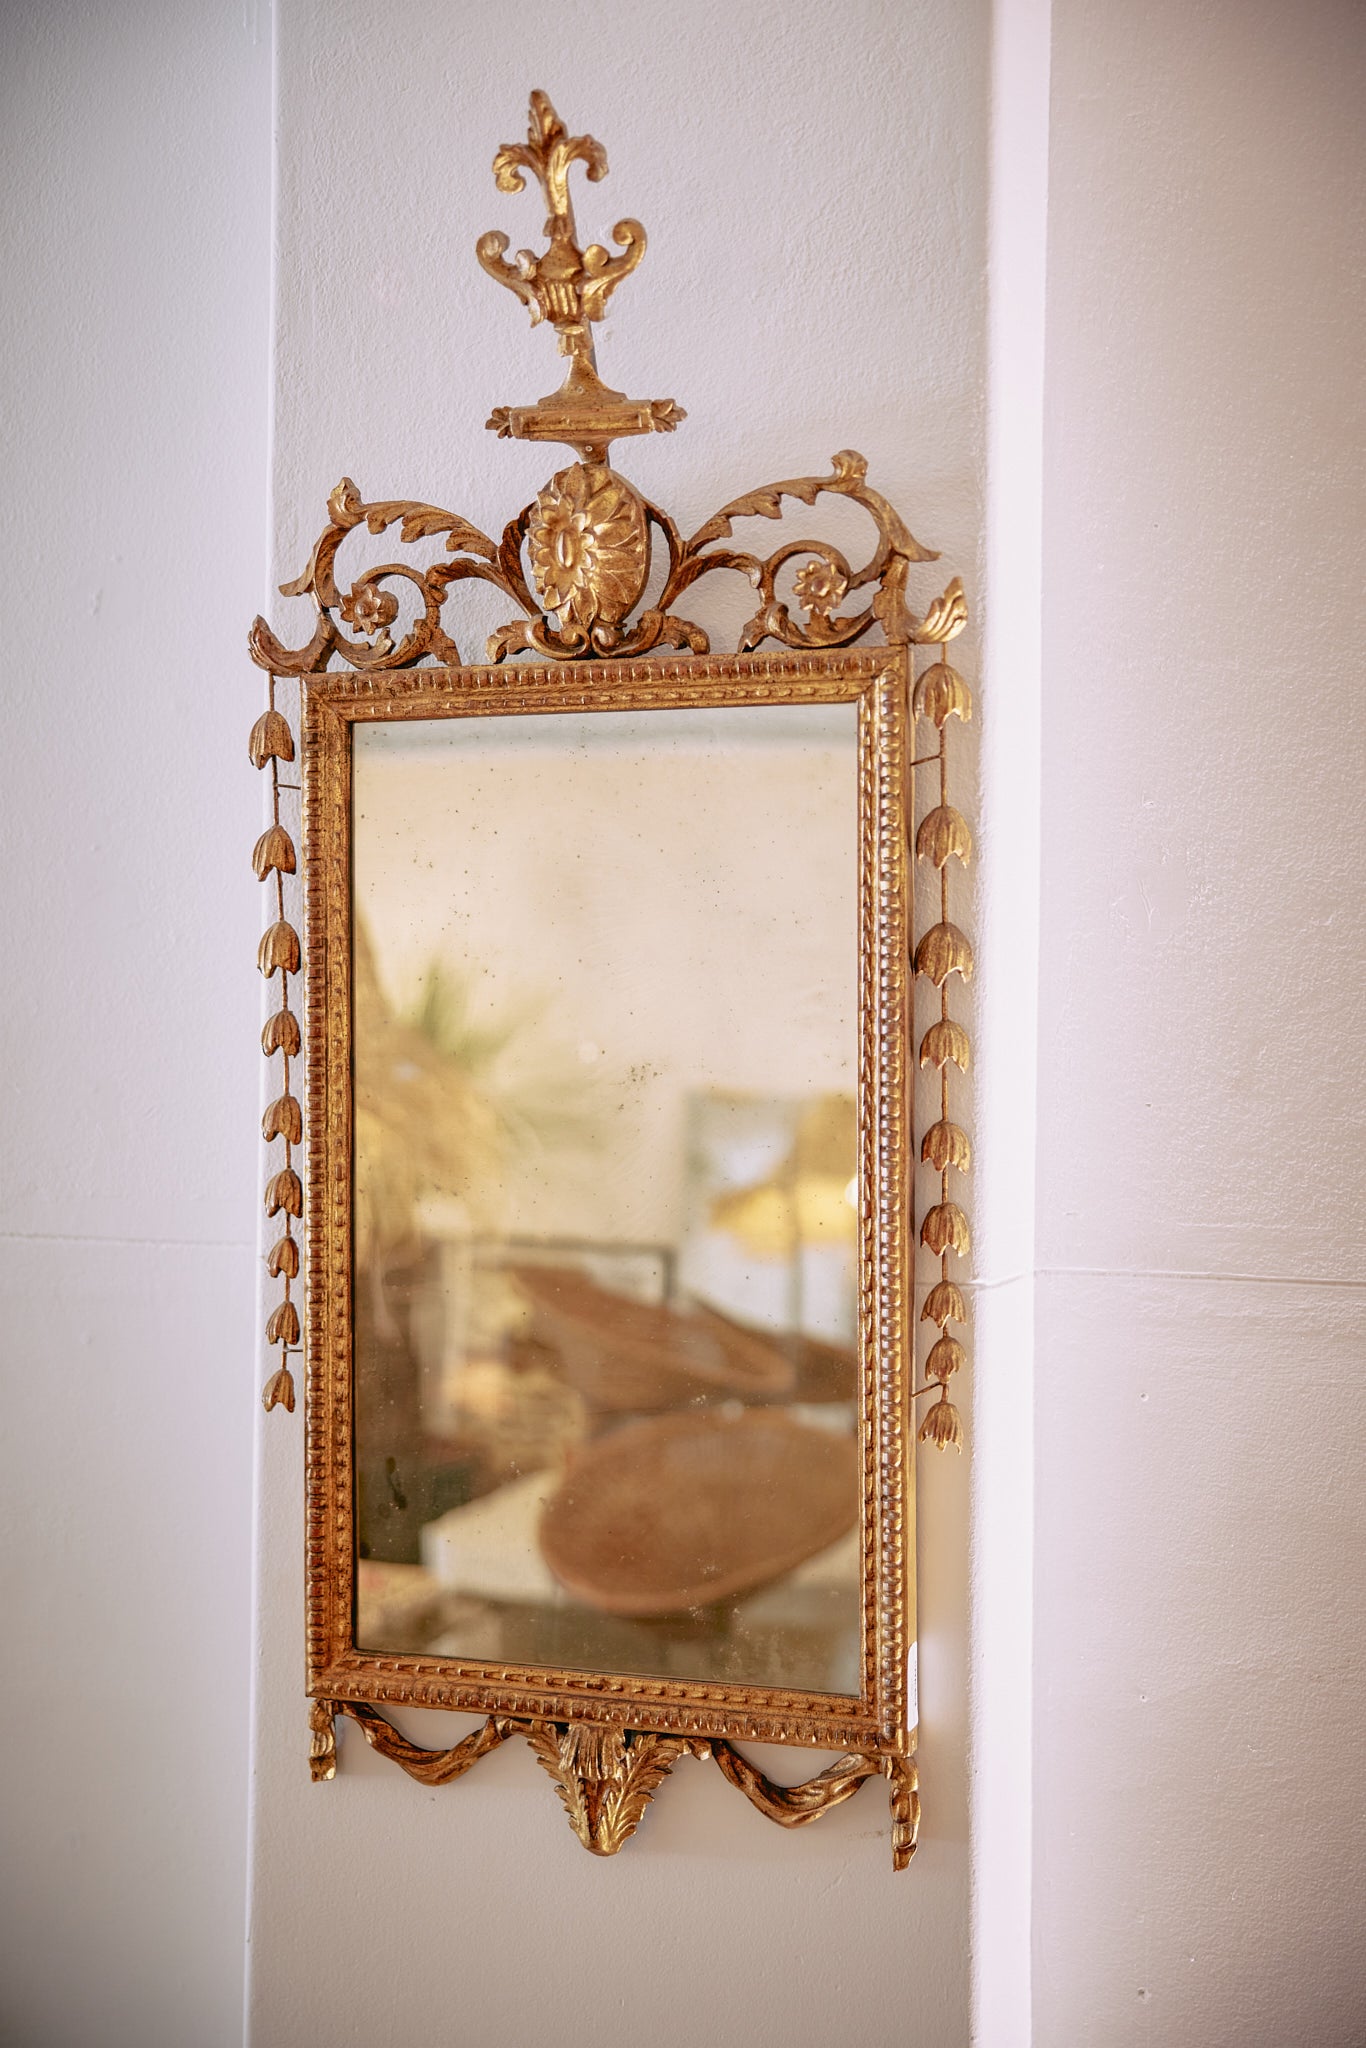 Late 19th century Firenze Italy, style of Louis XVI mirror